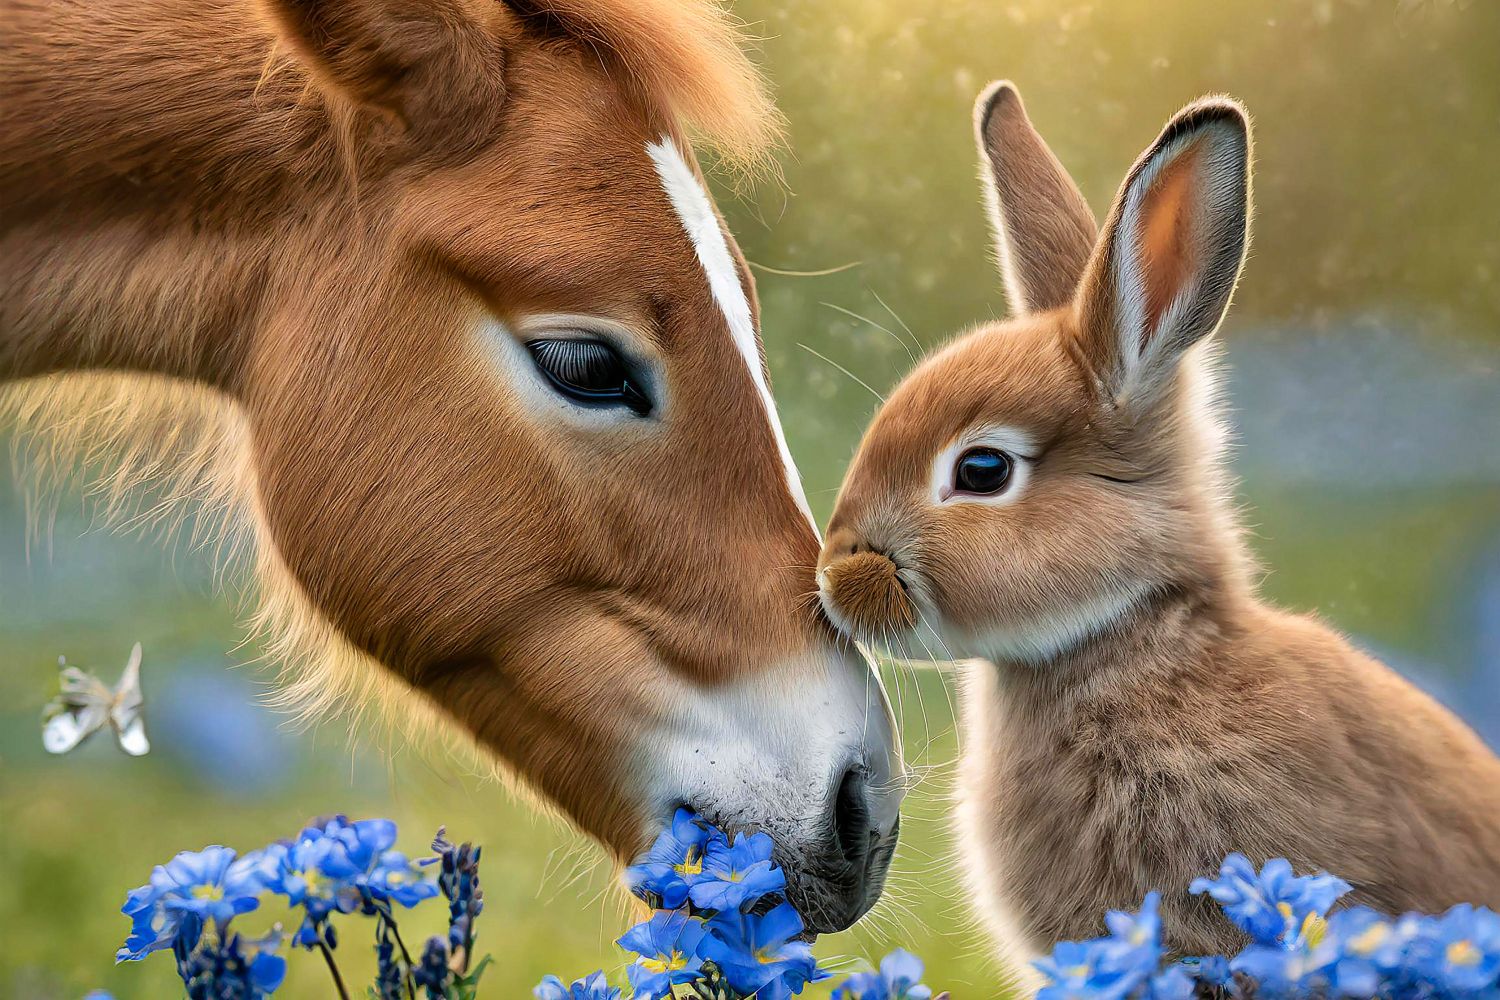 Pony and rabbit by Martin Lawrence Photography